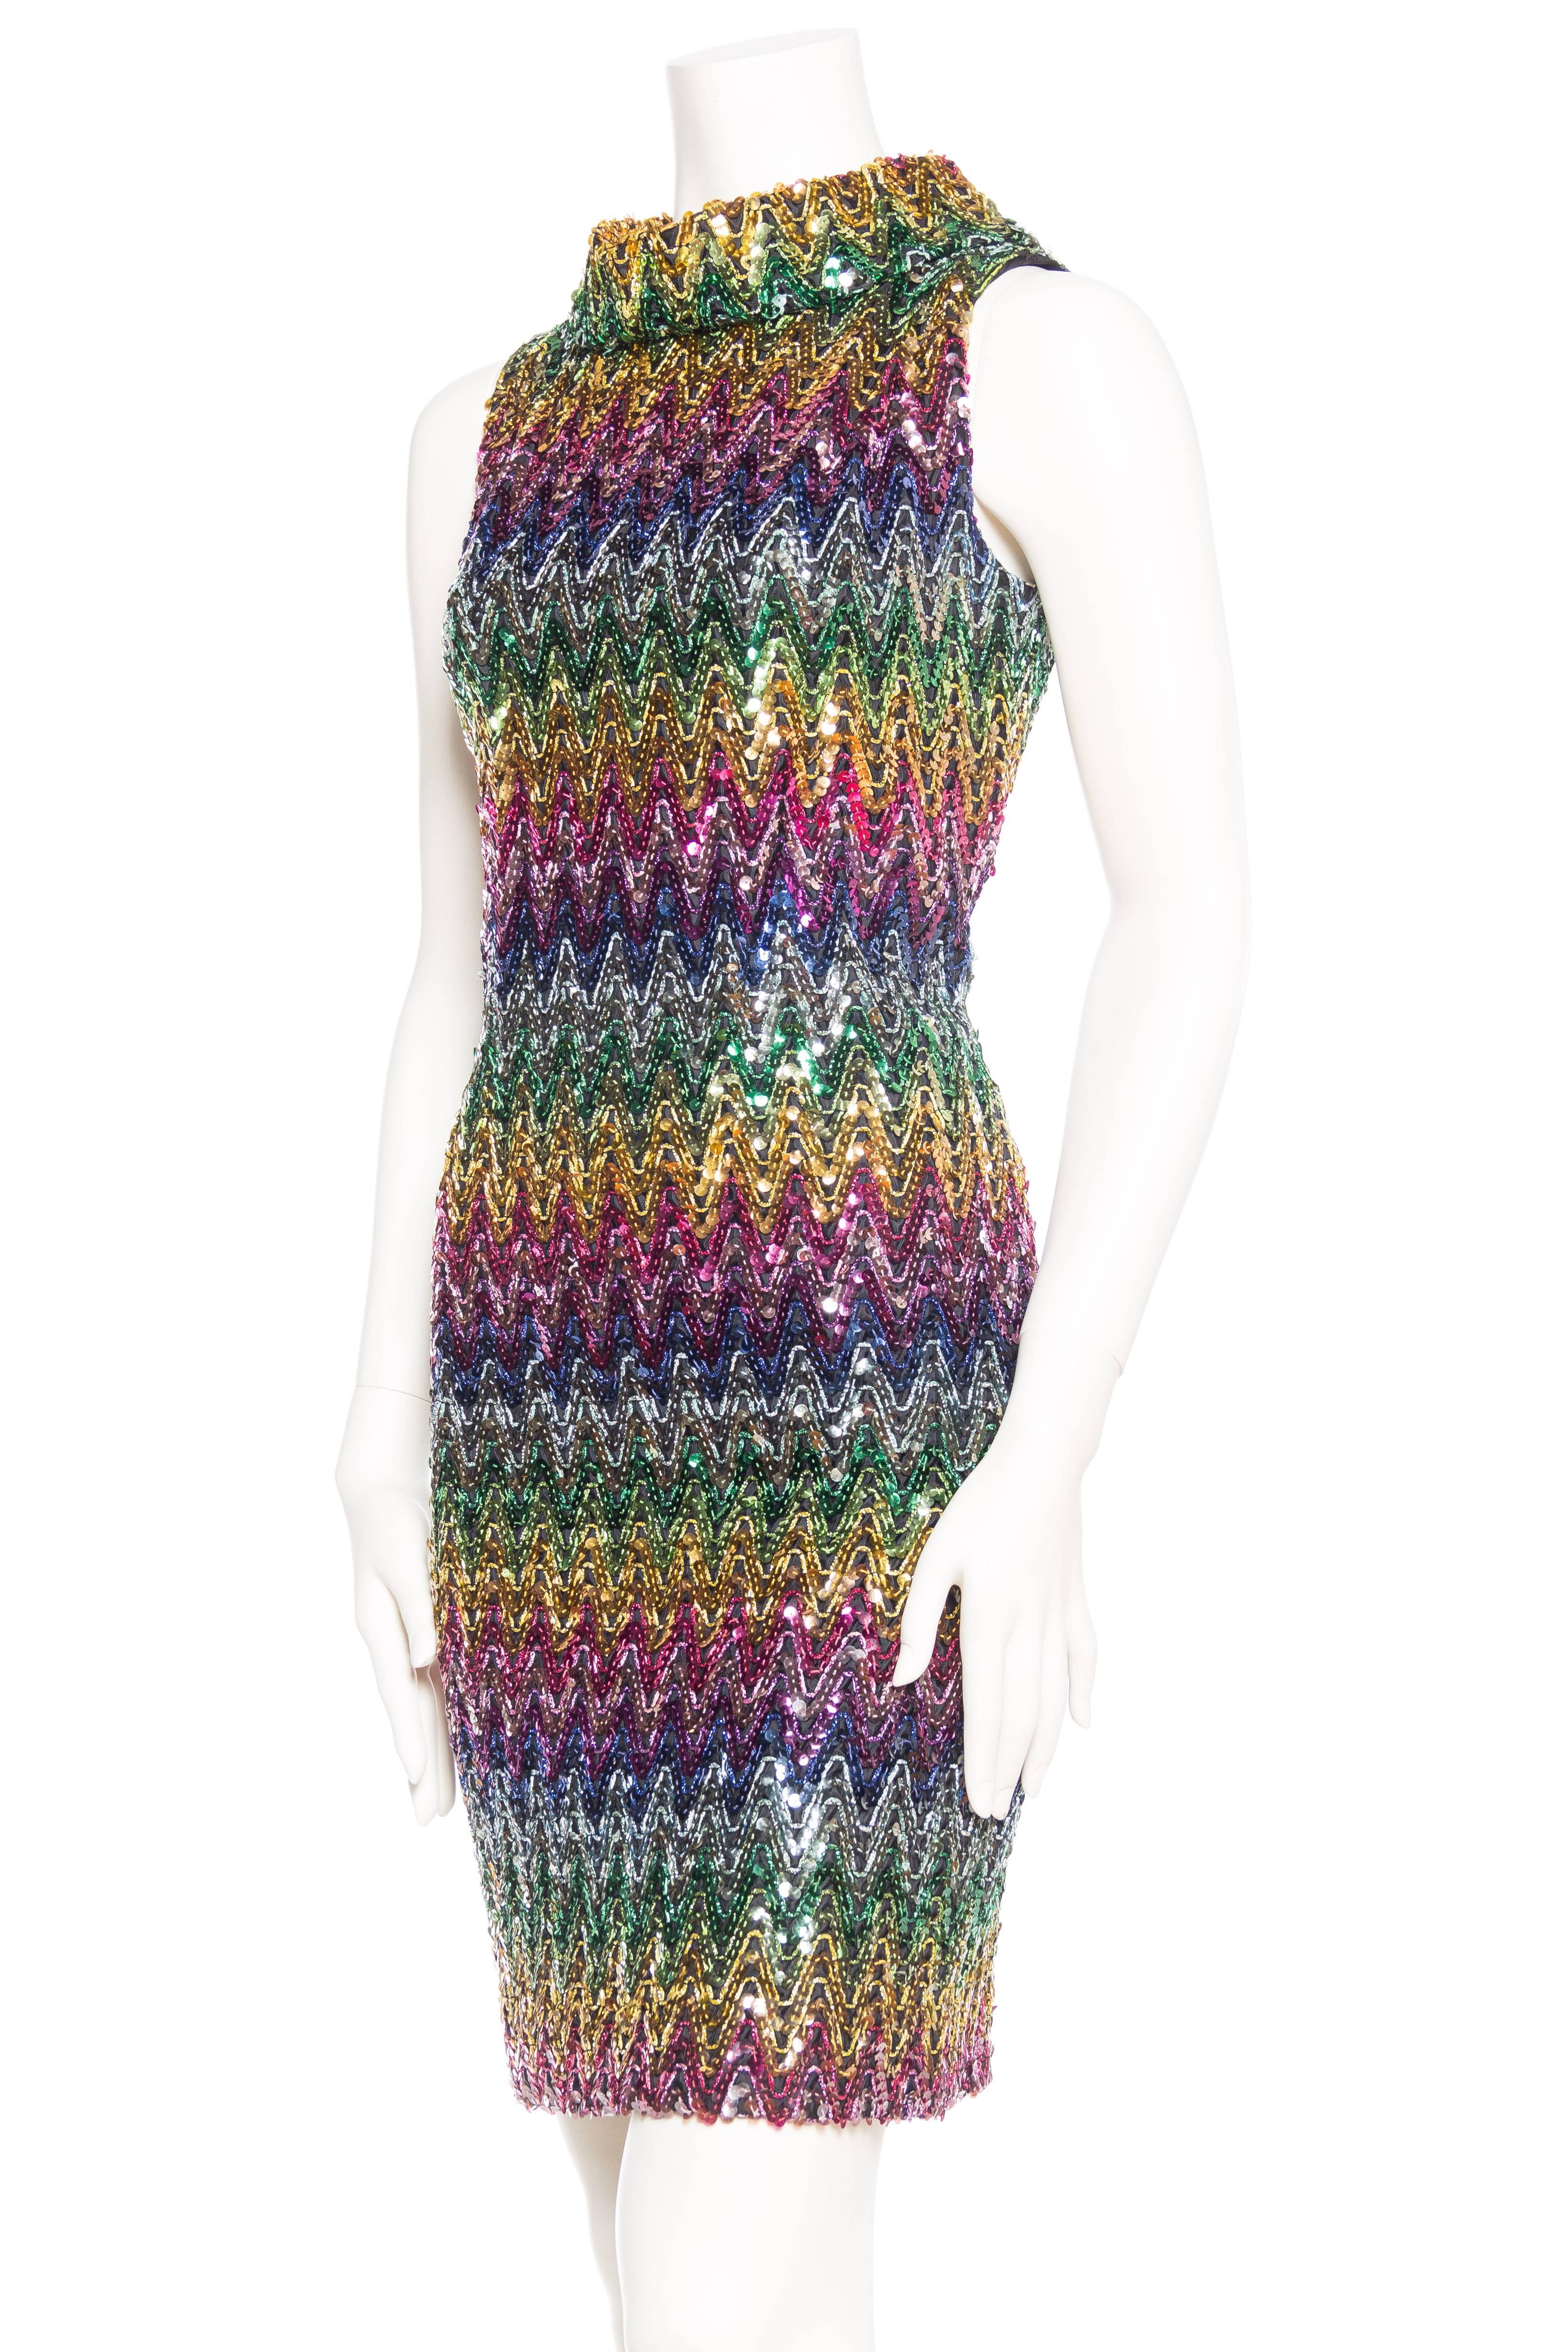 1960s Disco Rainbow Sequined Dress from Magnin 1